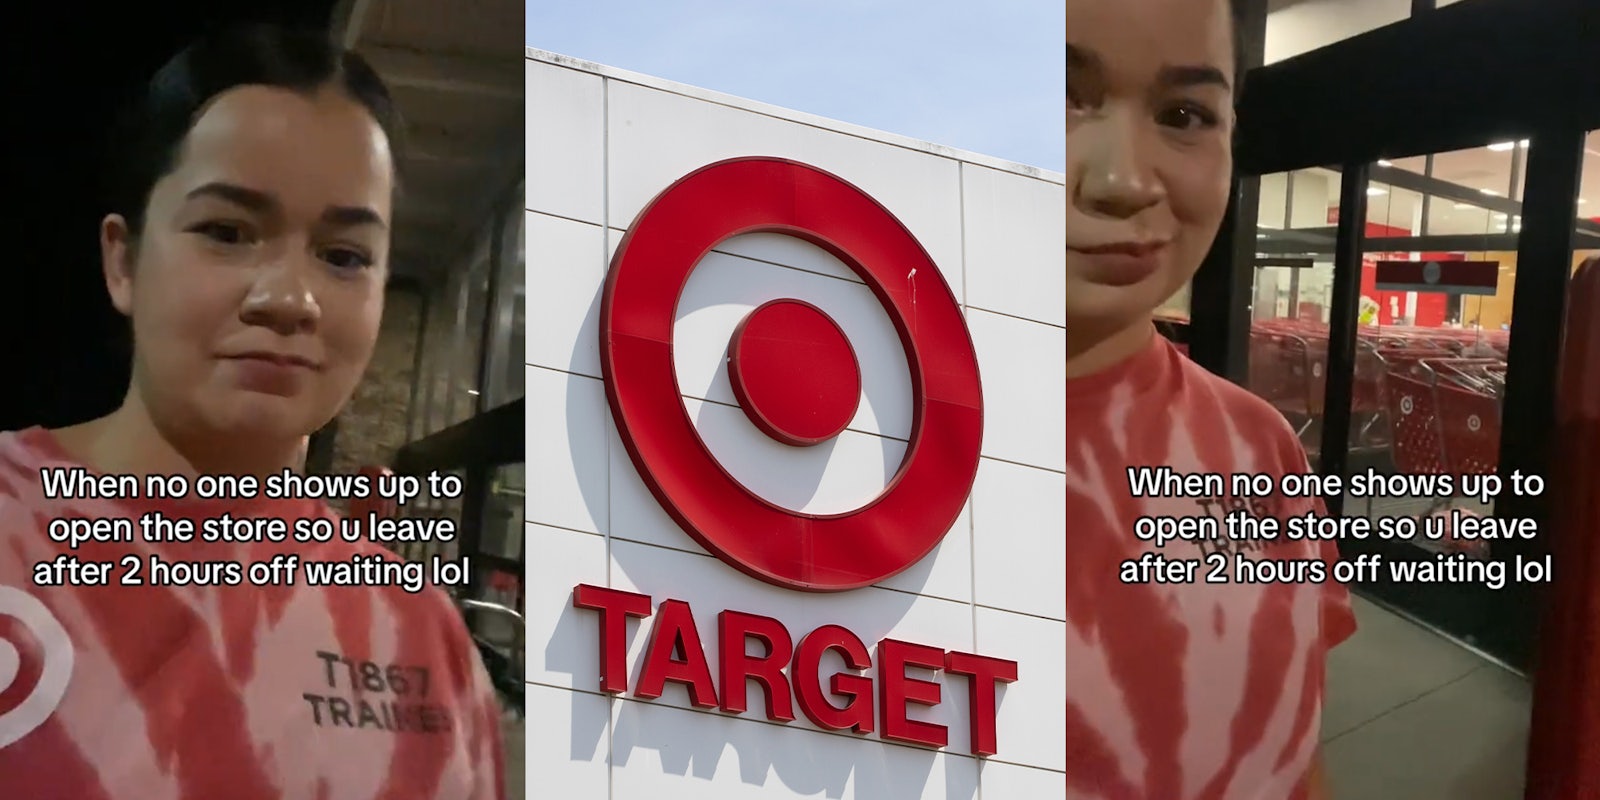 Target Worker Waits Over 2 Hours After No One Shows to Open